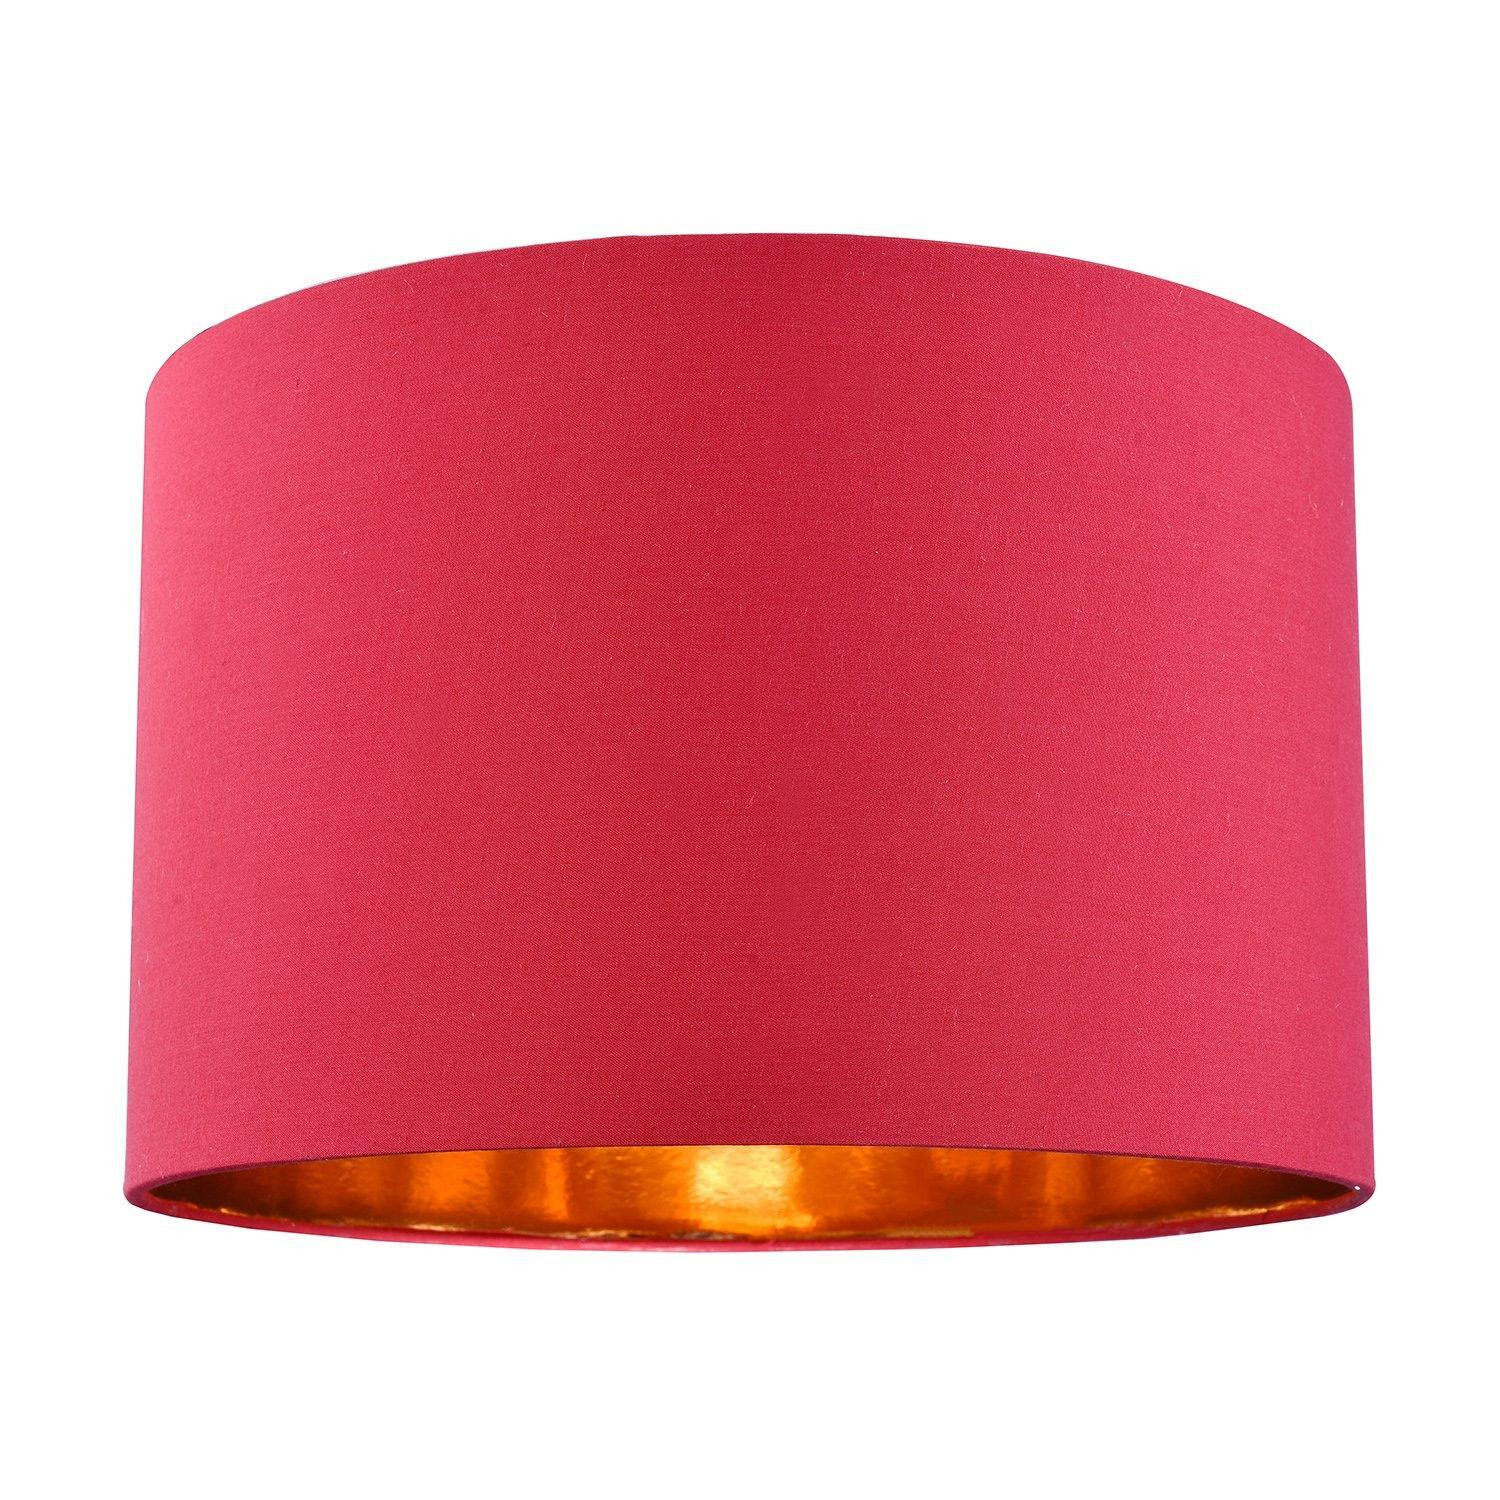 Contemporary Cotton Lamp/Light Shade with Shiny Paper Inner - image 1